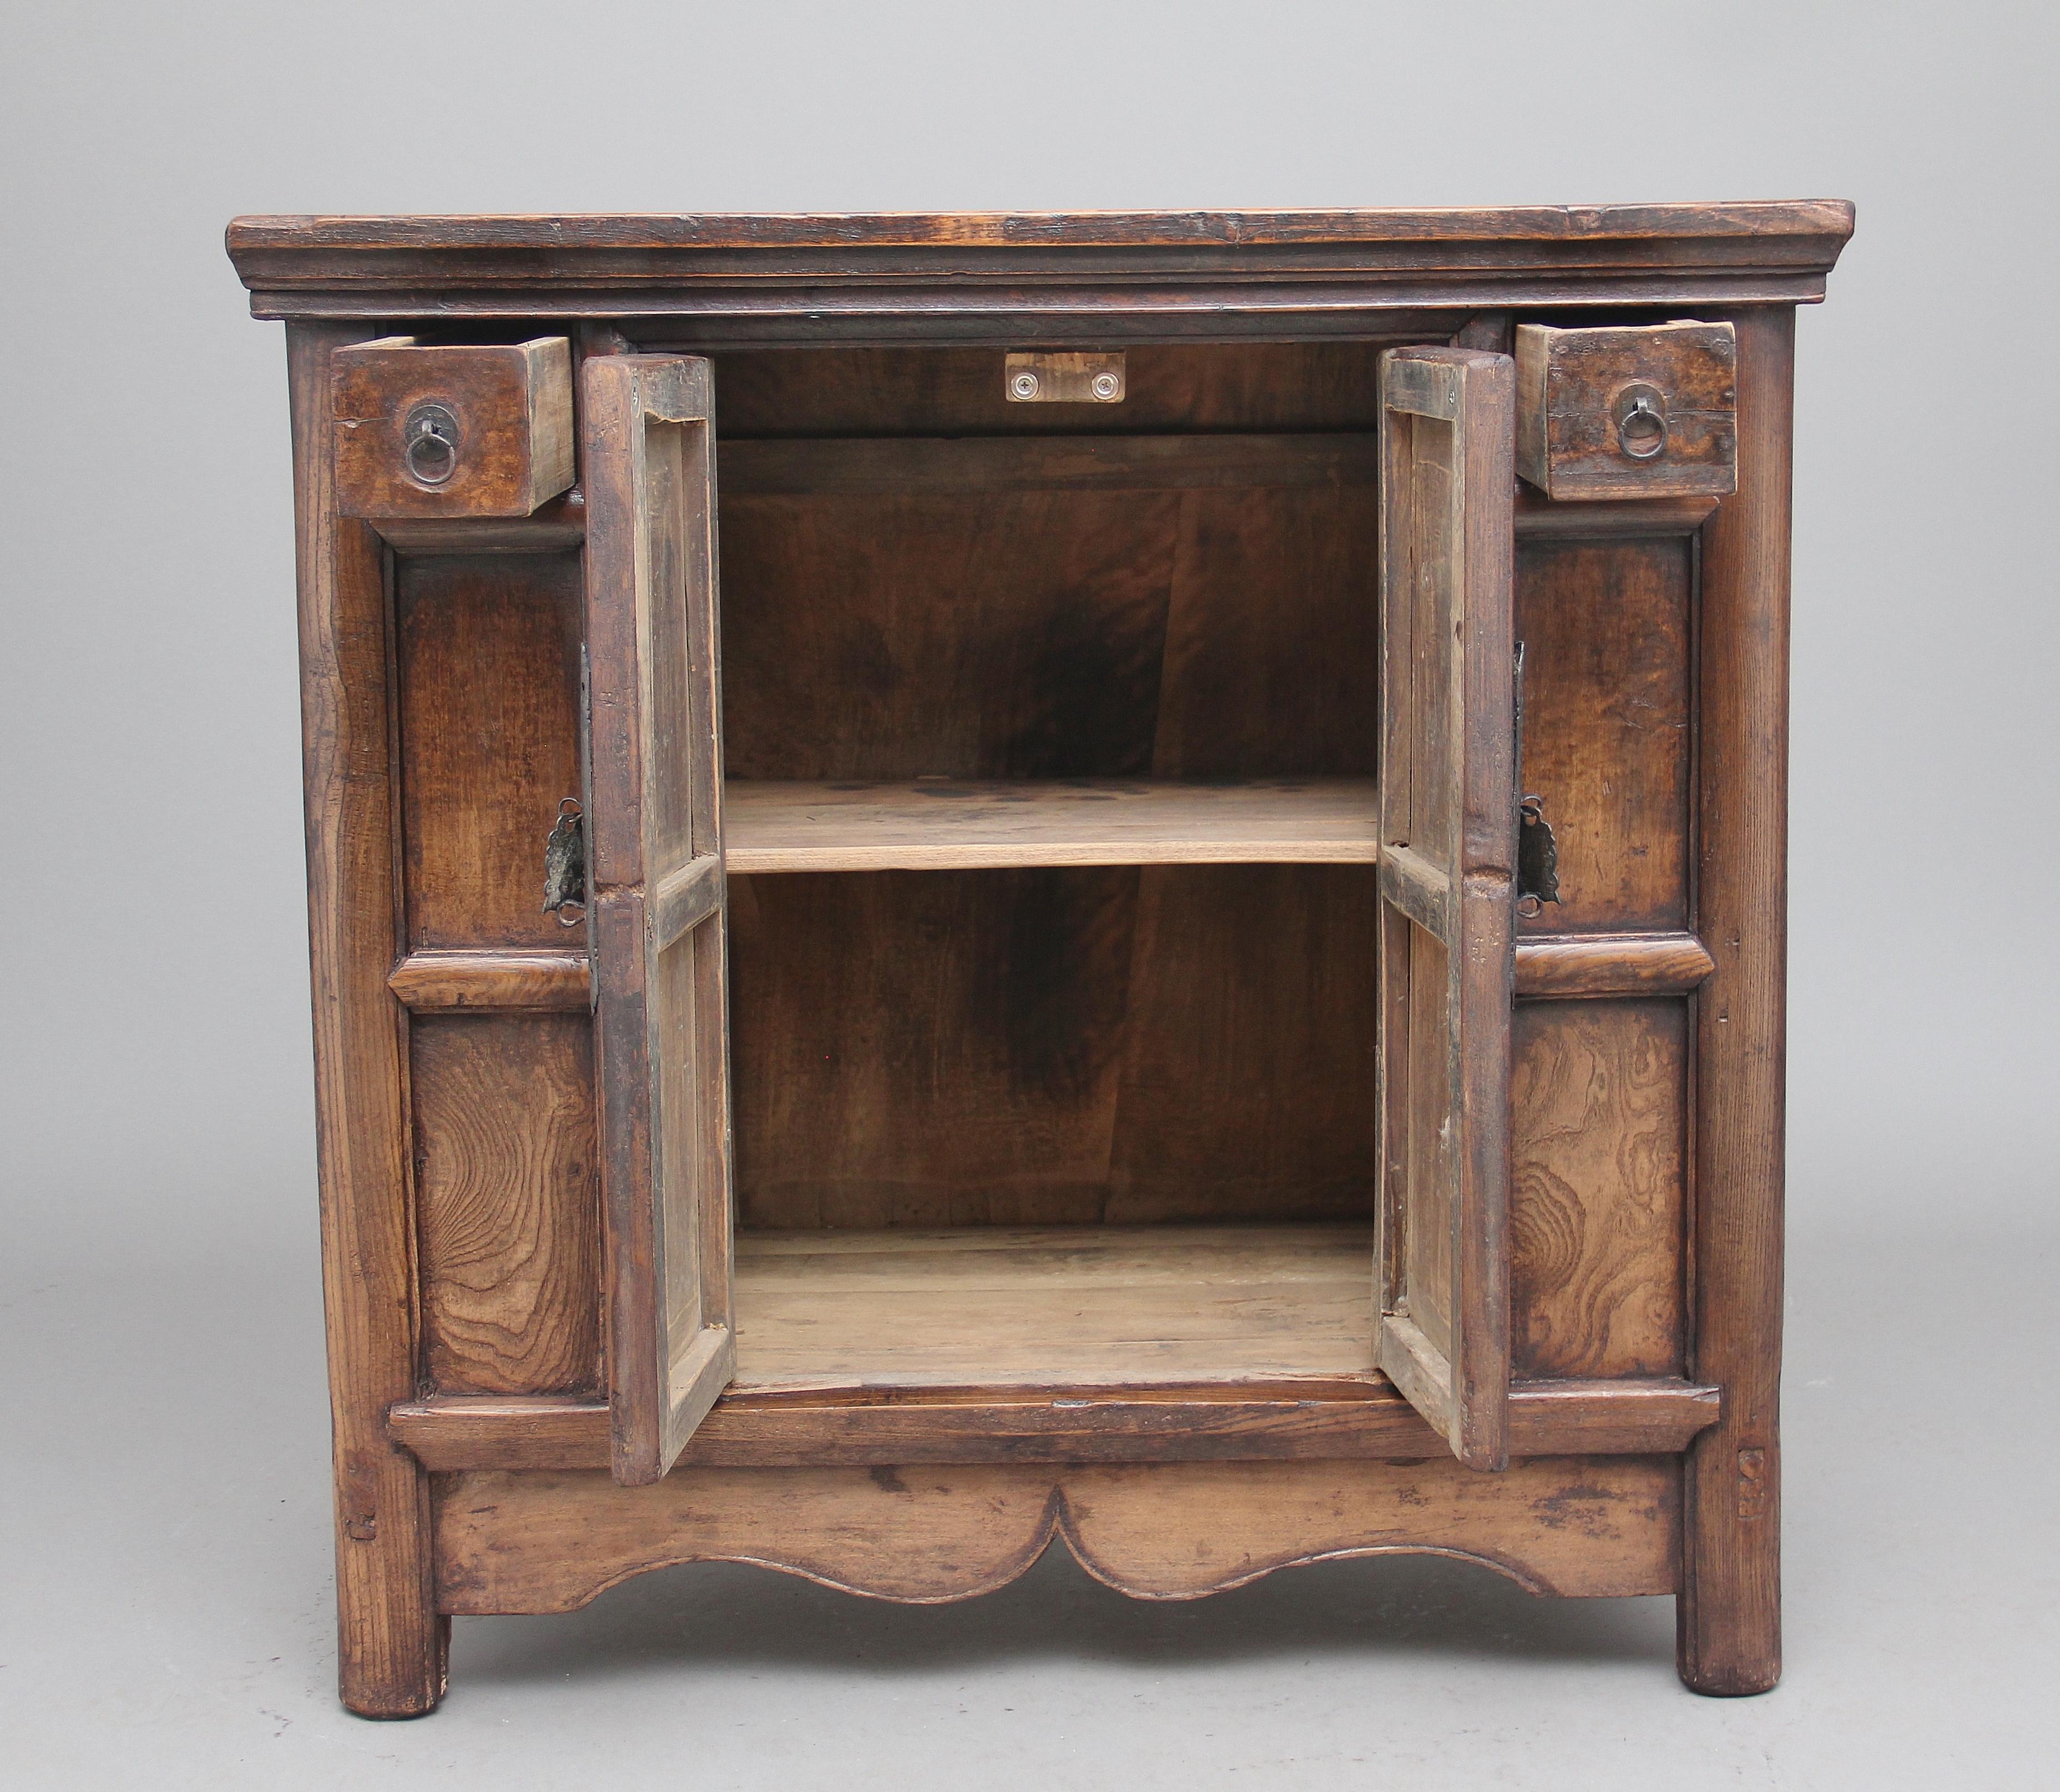 19th century Chinese elm rustic dresser of nice proportions, lovely figured panels, bold moldings, having a two door cupboard at the centre with original brass hardware, opening to reveal a fixed single shelf inside, flanked either side at the top